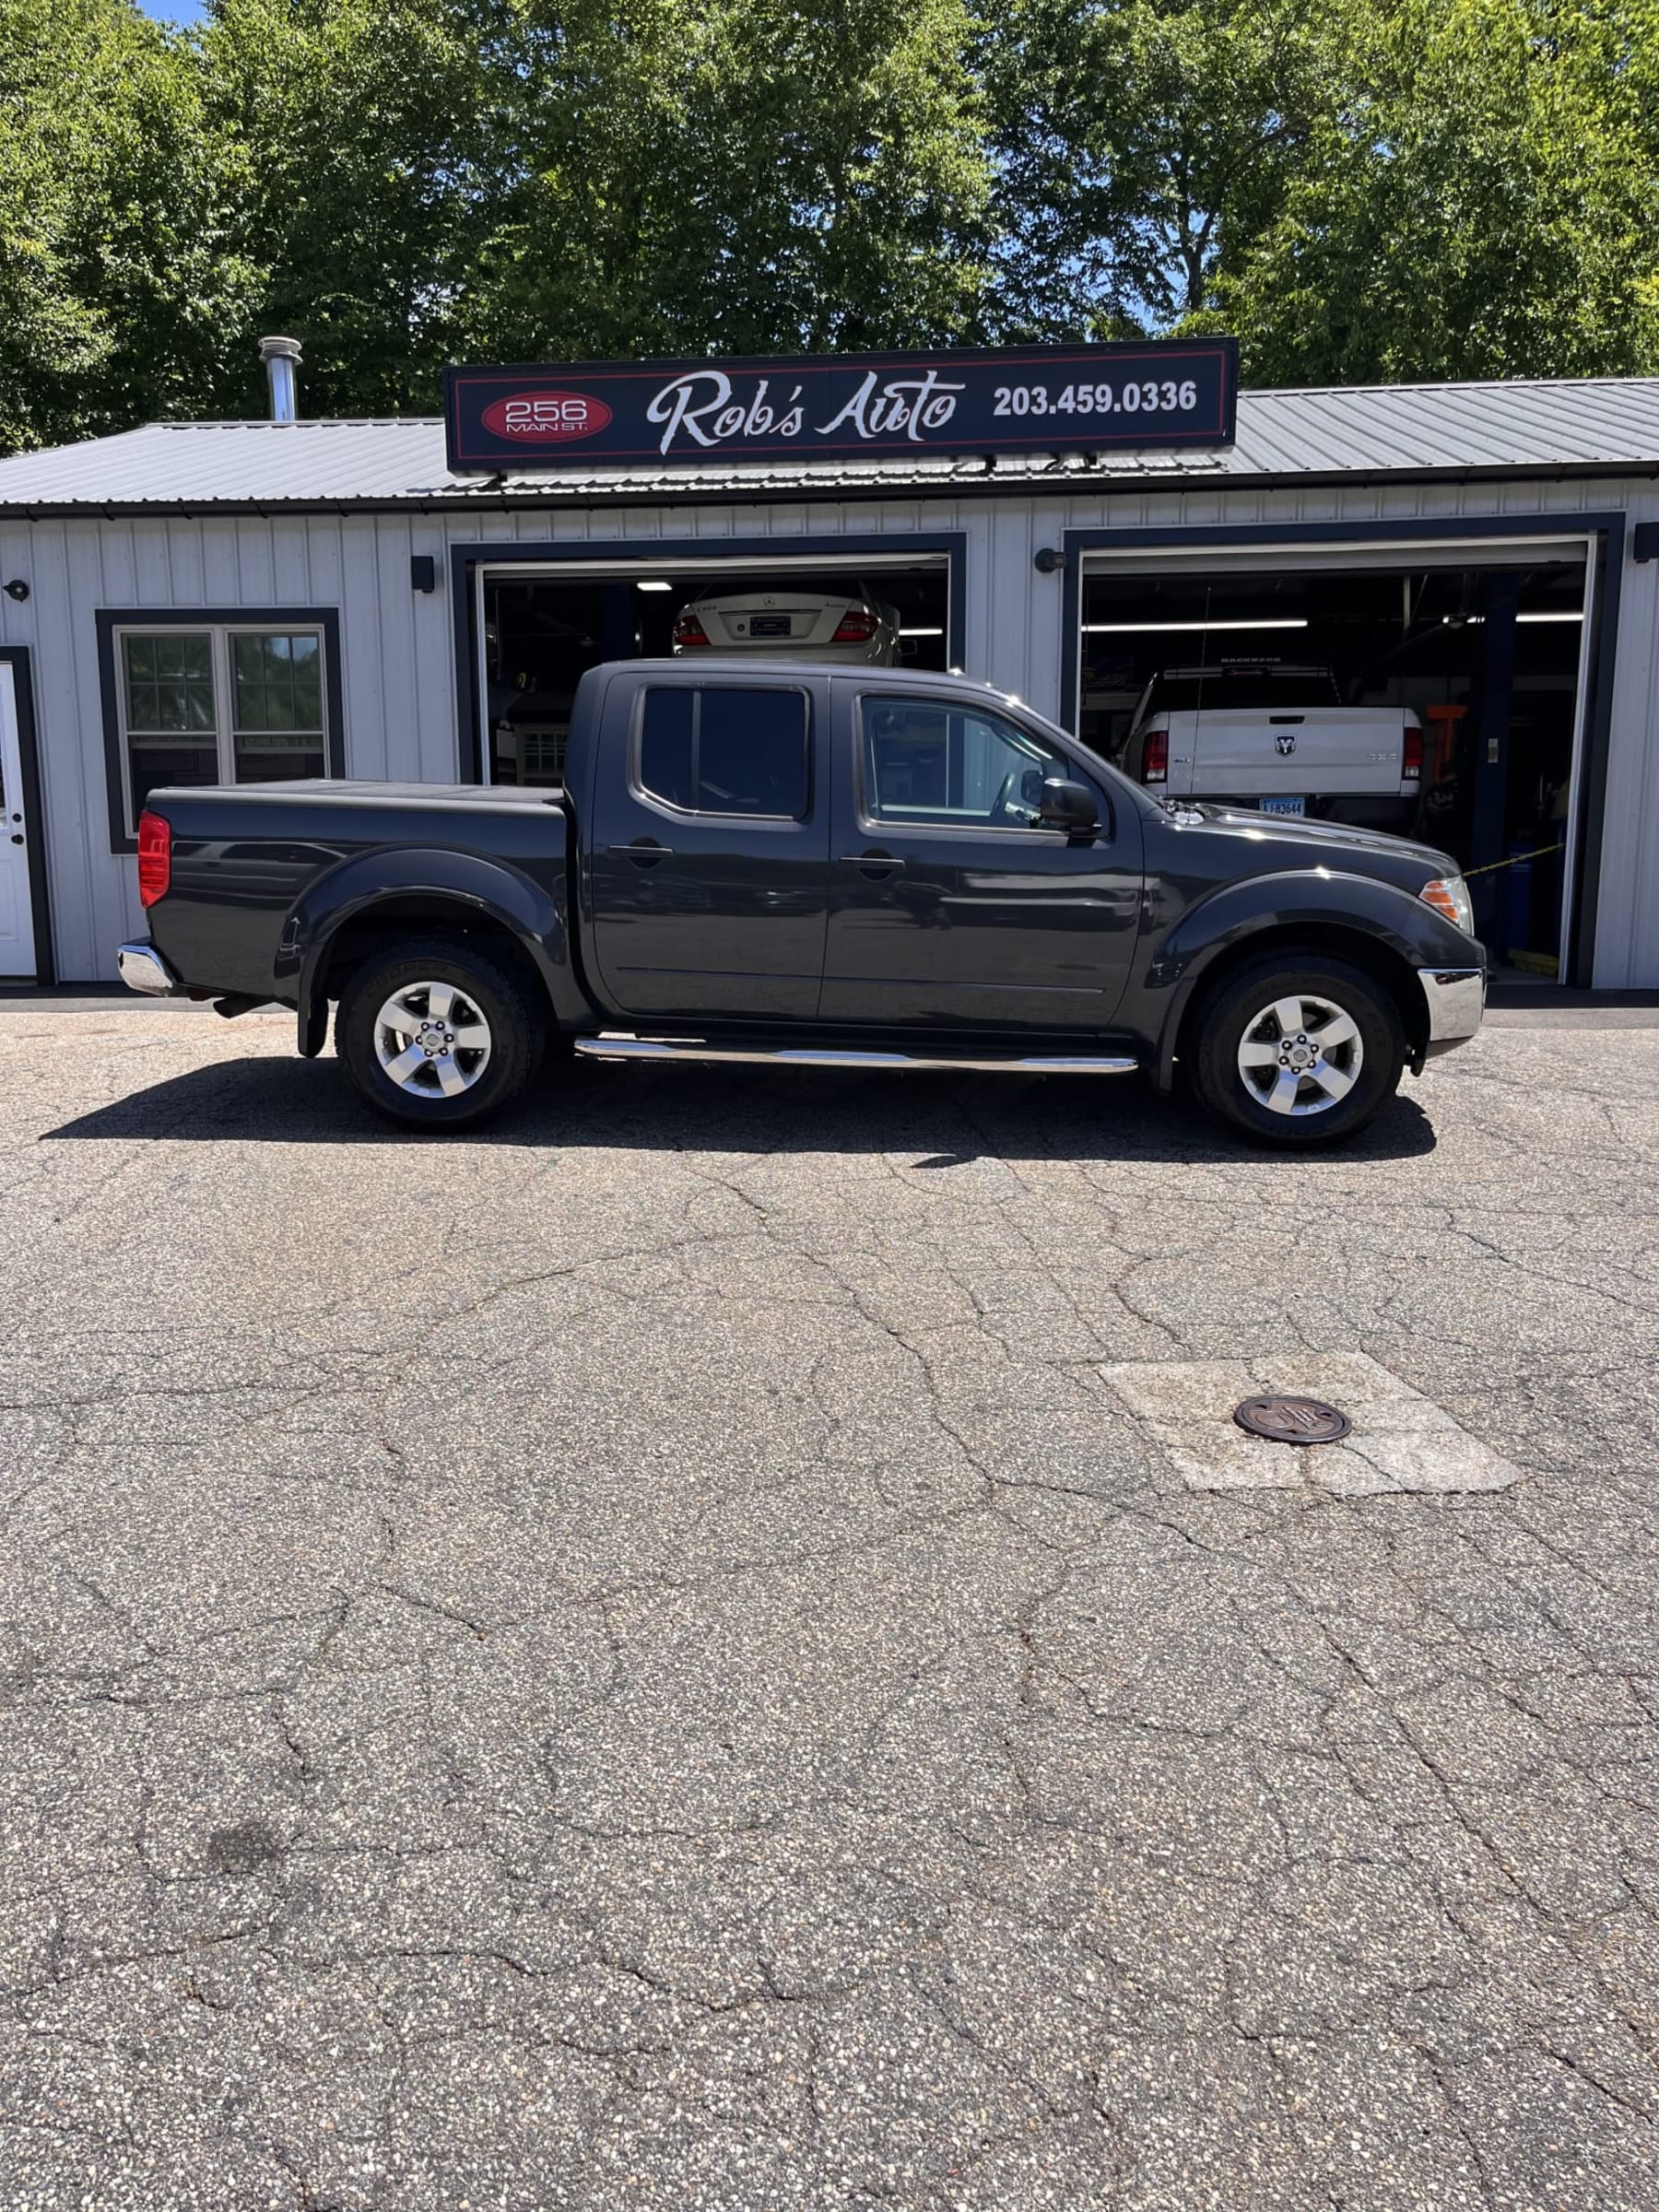 NEW ARRIVAL!! One owner! Clean carfax! Rust and rot free!! 4x4!! 2011 Nissan Frontier SV!! 4.0 V6! Hard Tonneau cover! Bed extender! Dealer serviced!! 158k miles!! Runs and drives like new!! Won’t last at ONLY $11,900!